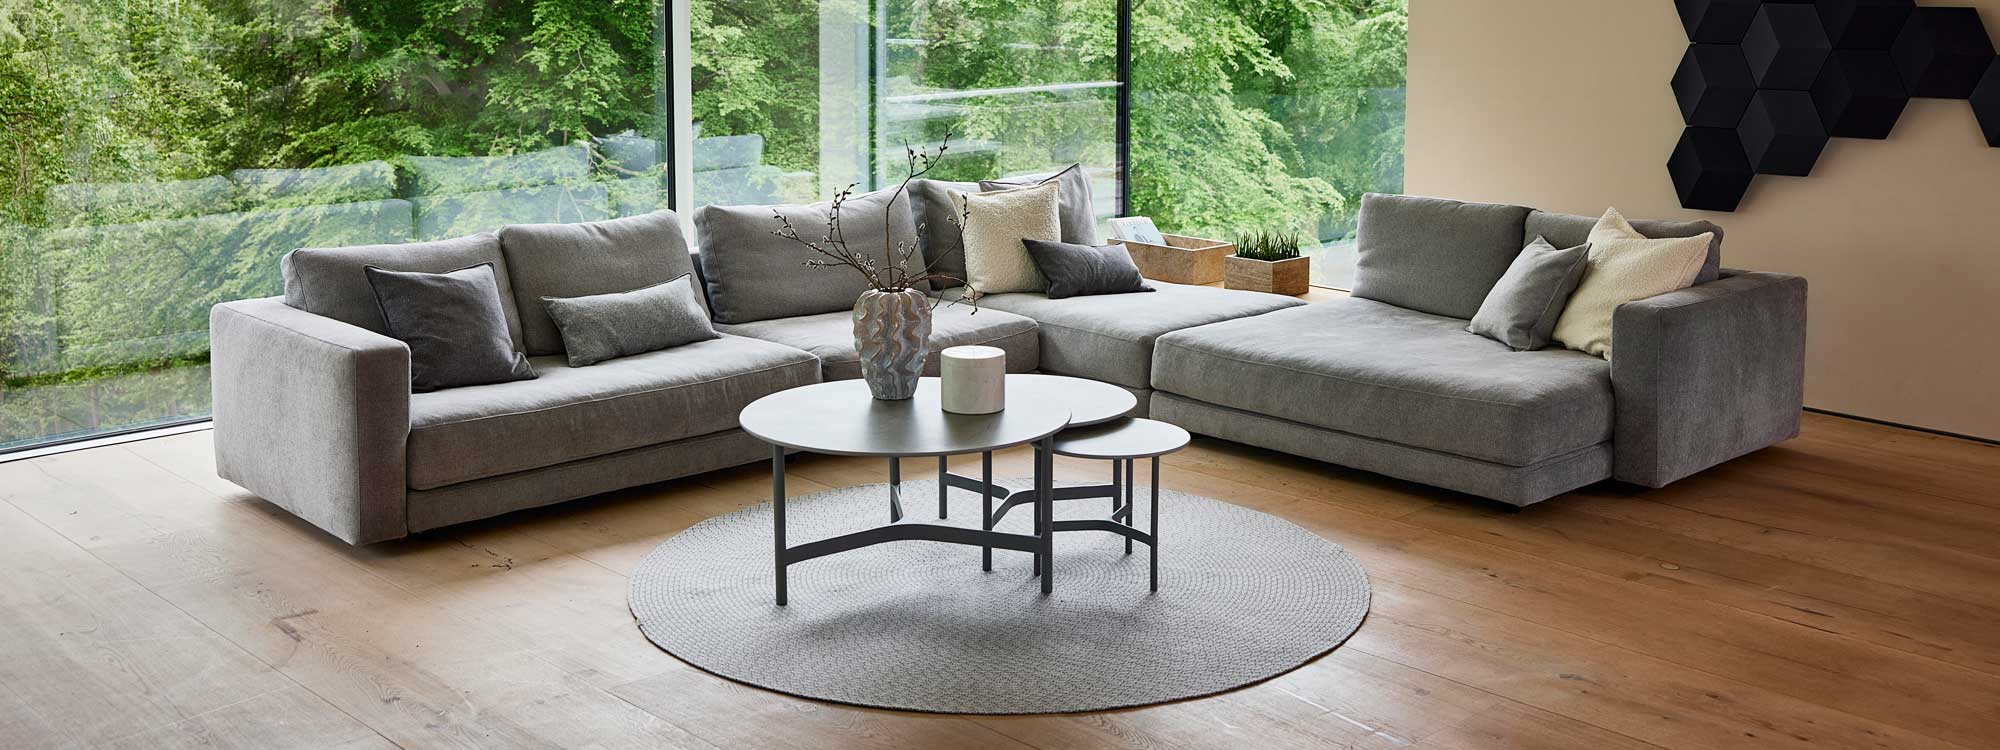 Image of snug Scale corner sofa and daybed with Light grey Cane-line Essence fabric, with nest of Twist coffee tables in the centre